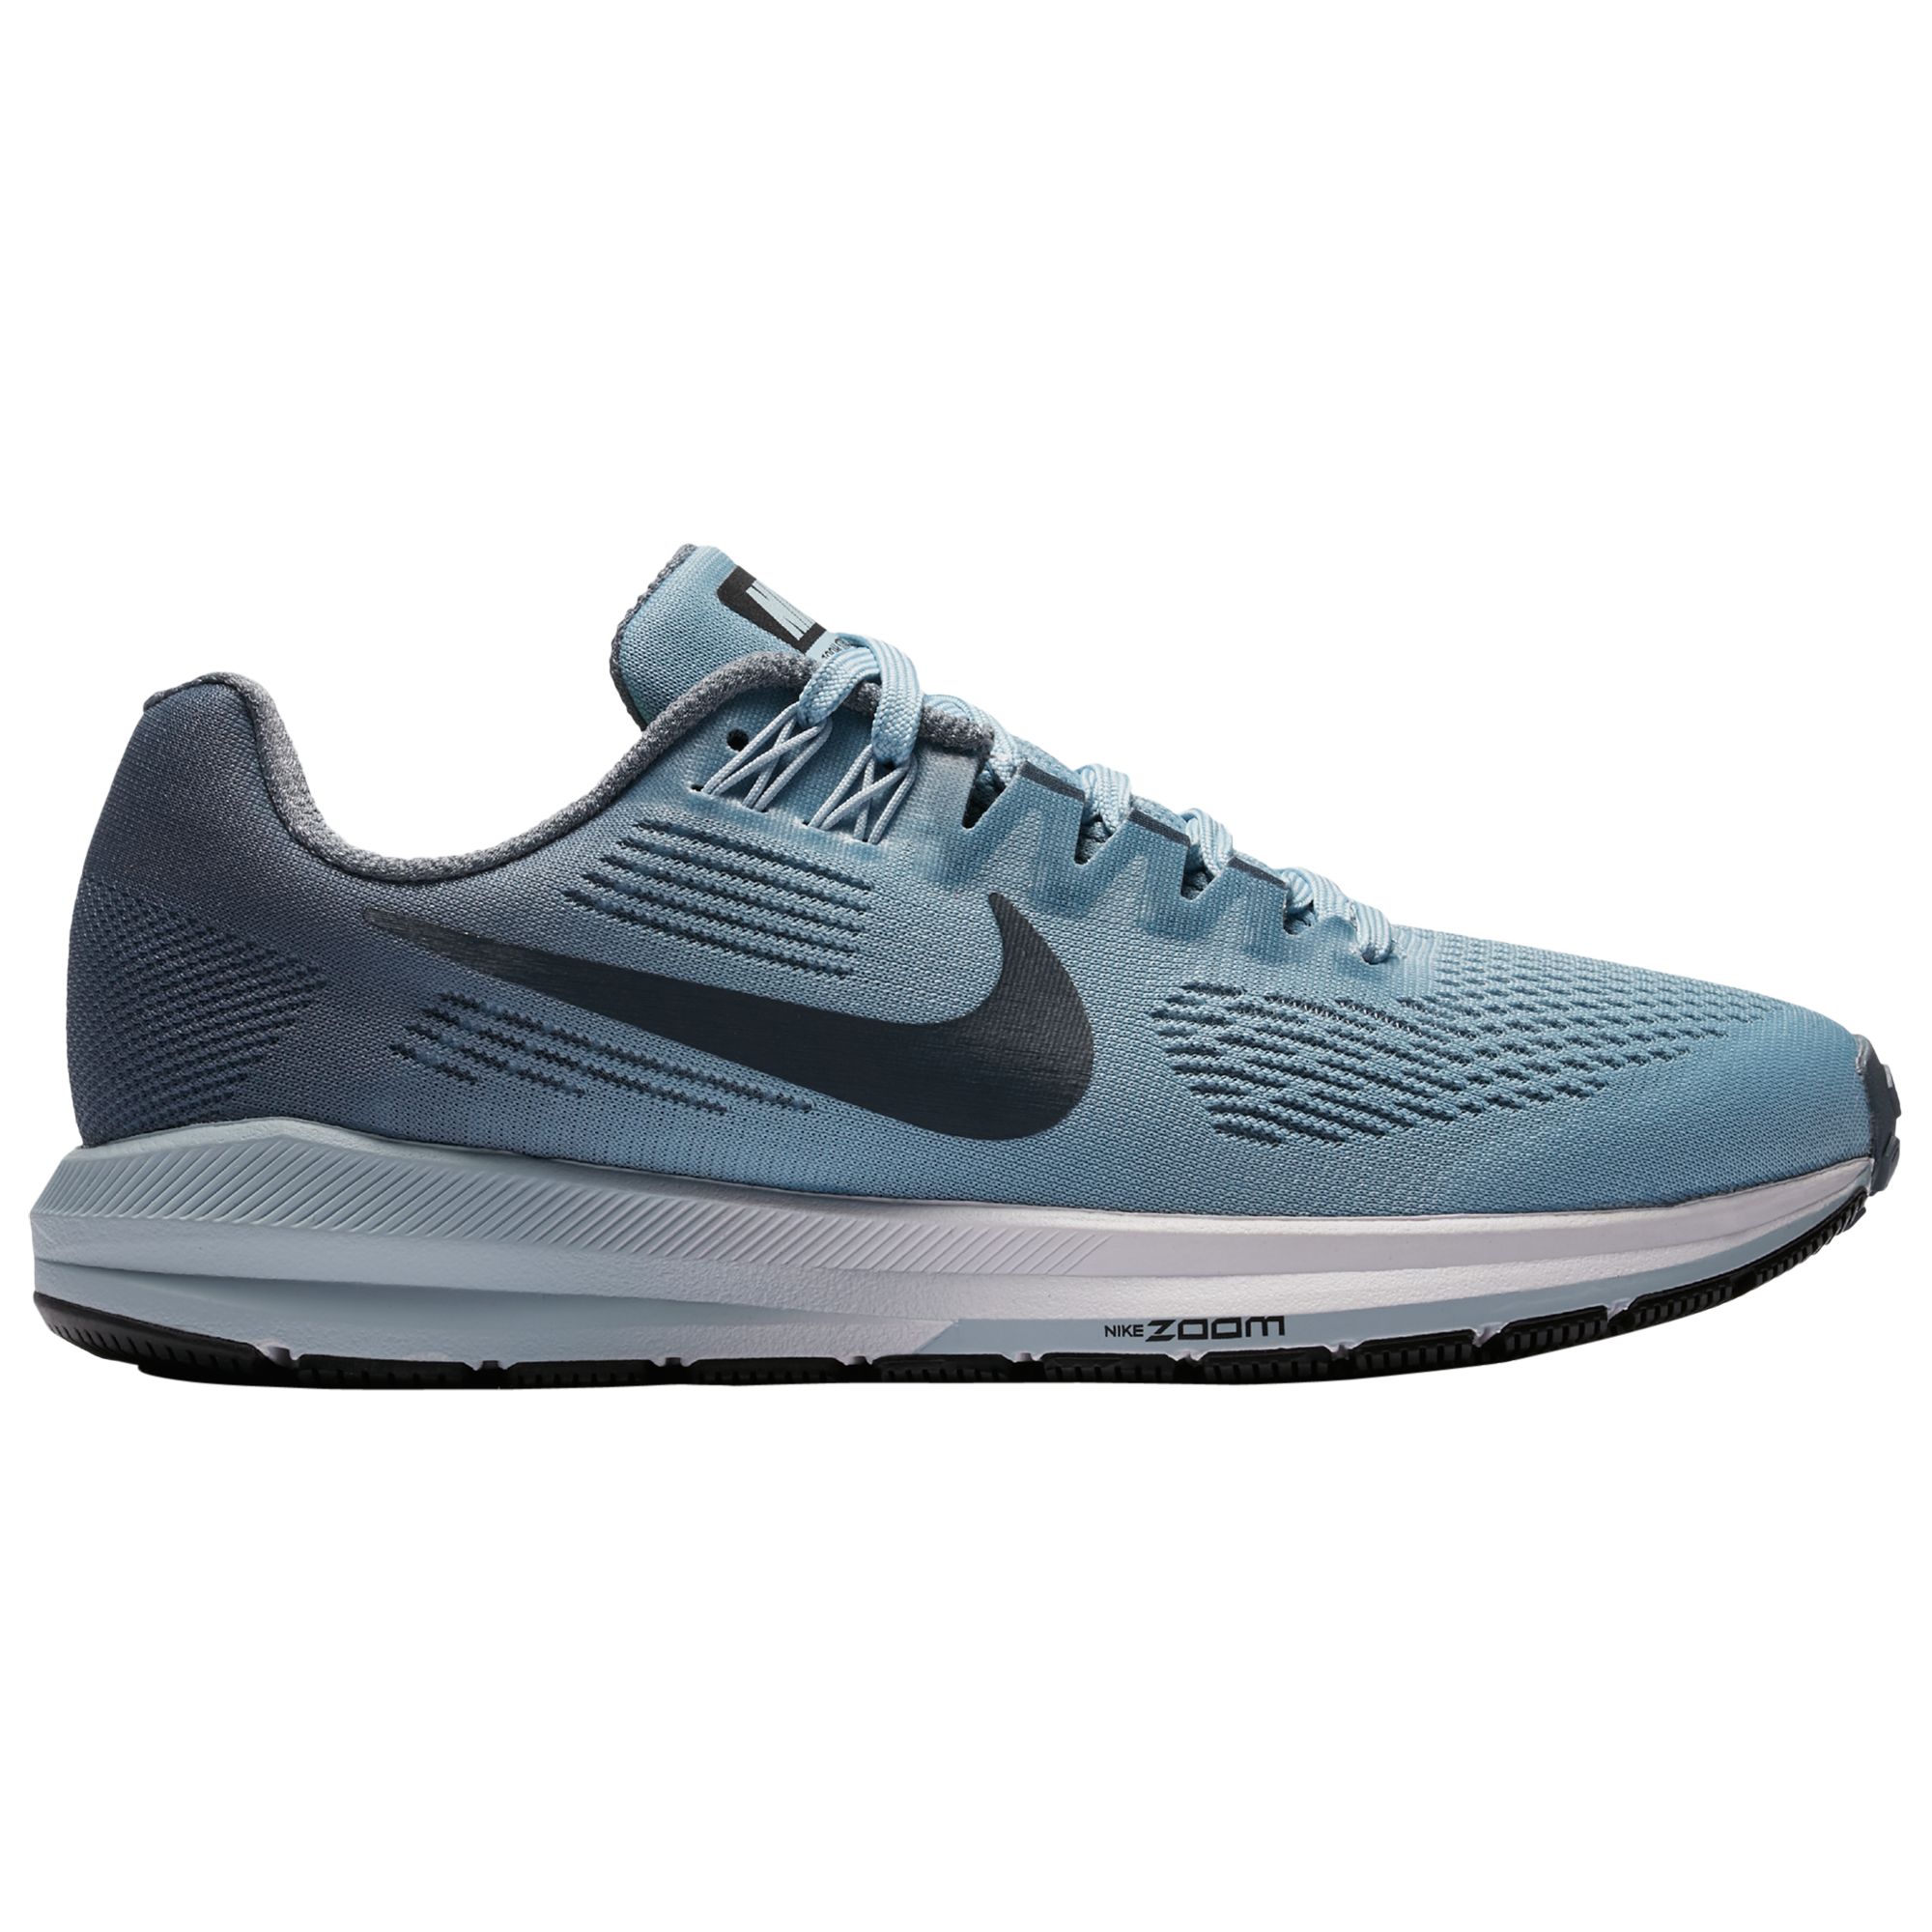 Nike Air Zoom Structure 21 Women's Running Shoes, Armoury Blue, 4